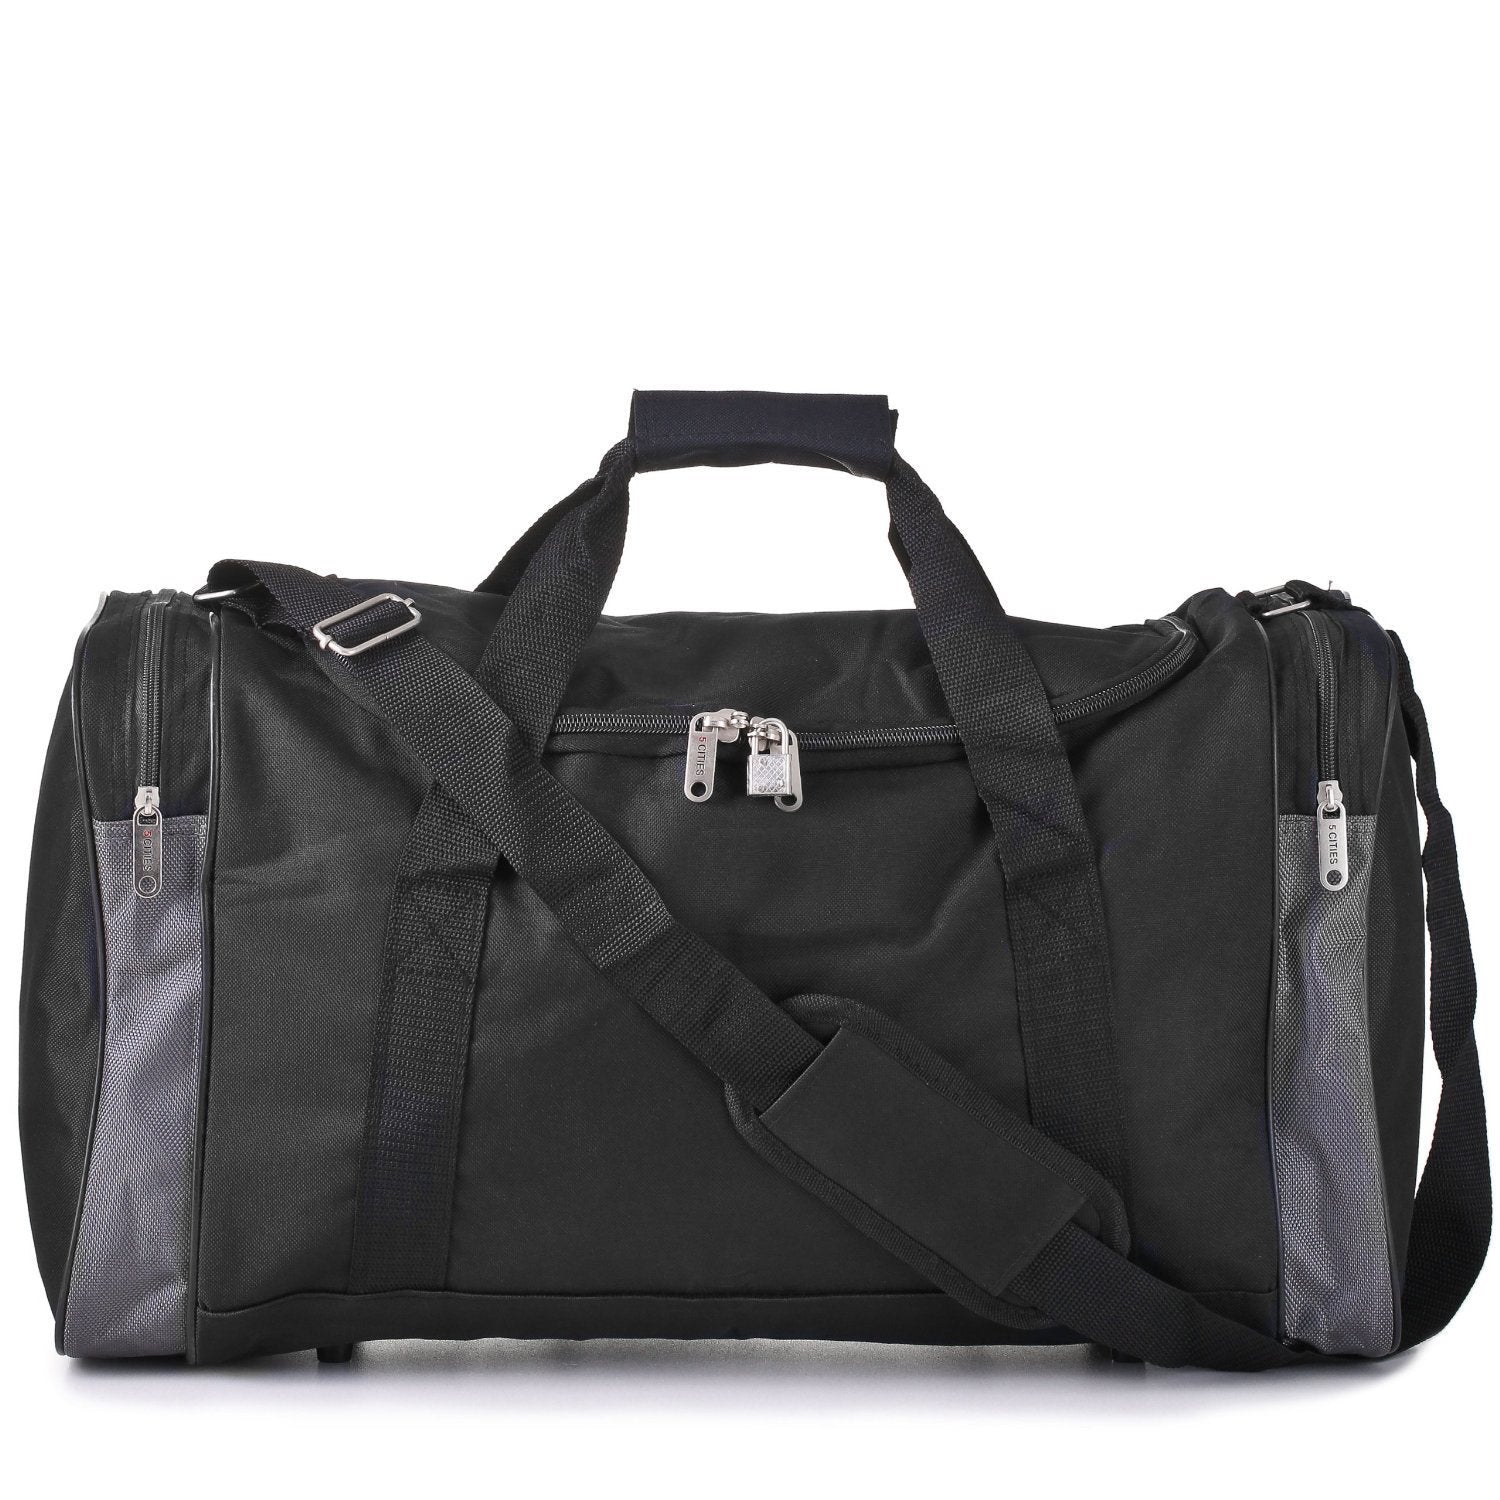 5 Cities Lightweight Hand Luggage Cabin Sized Sports Duffel Holdall (Black 330)